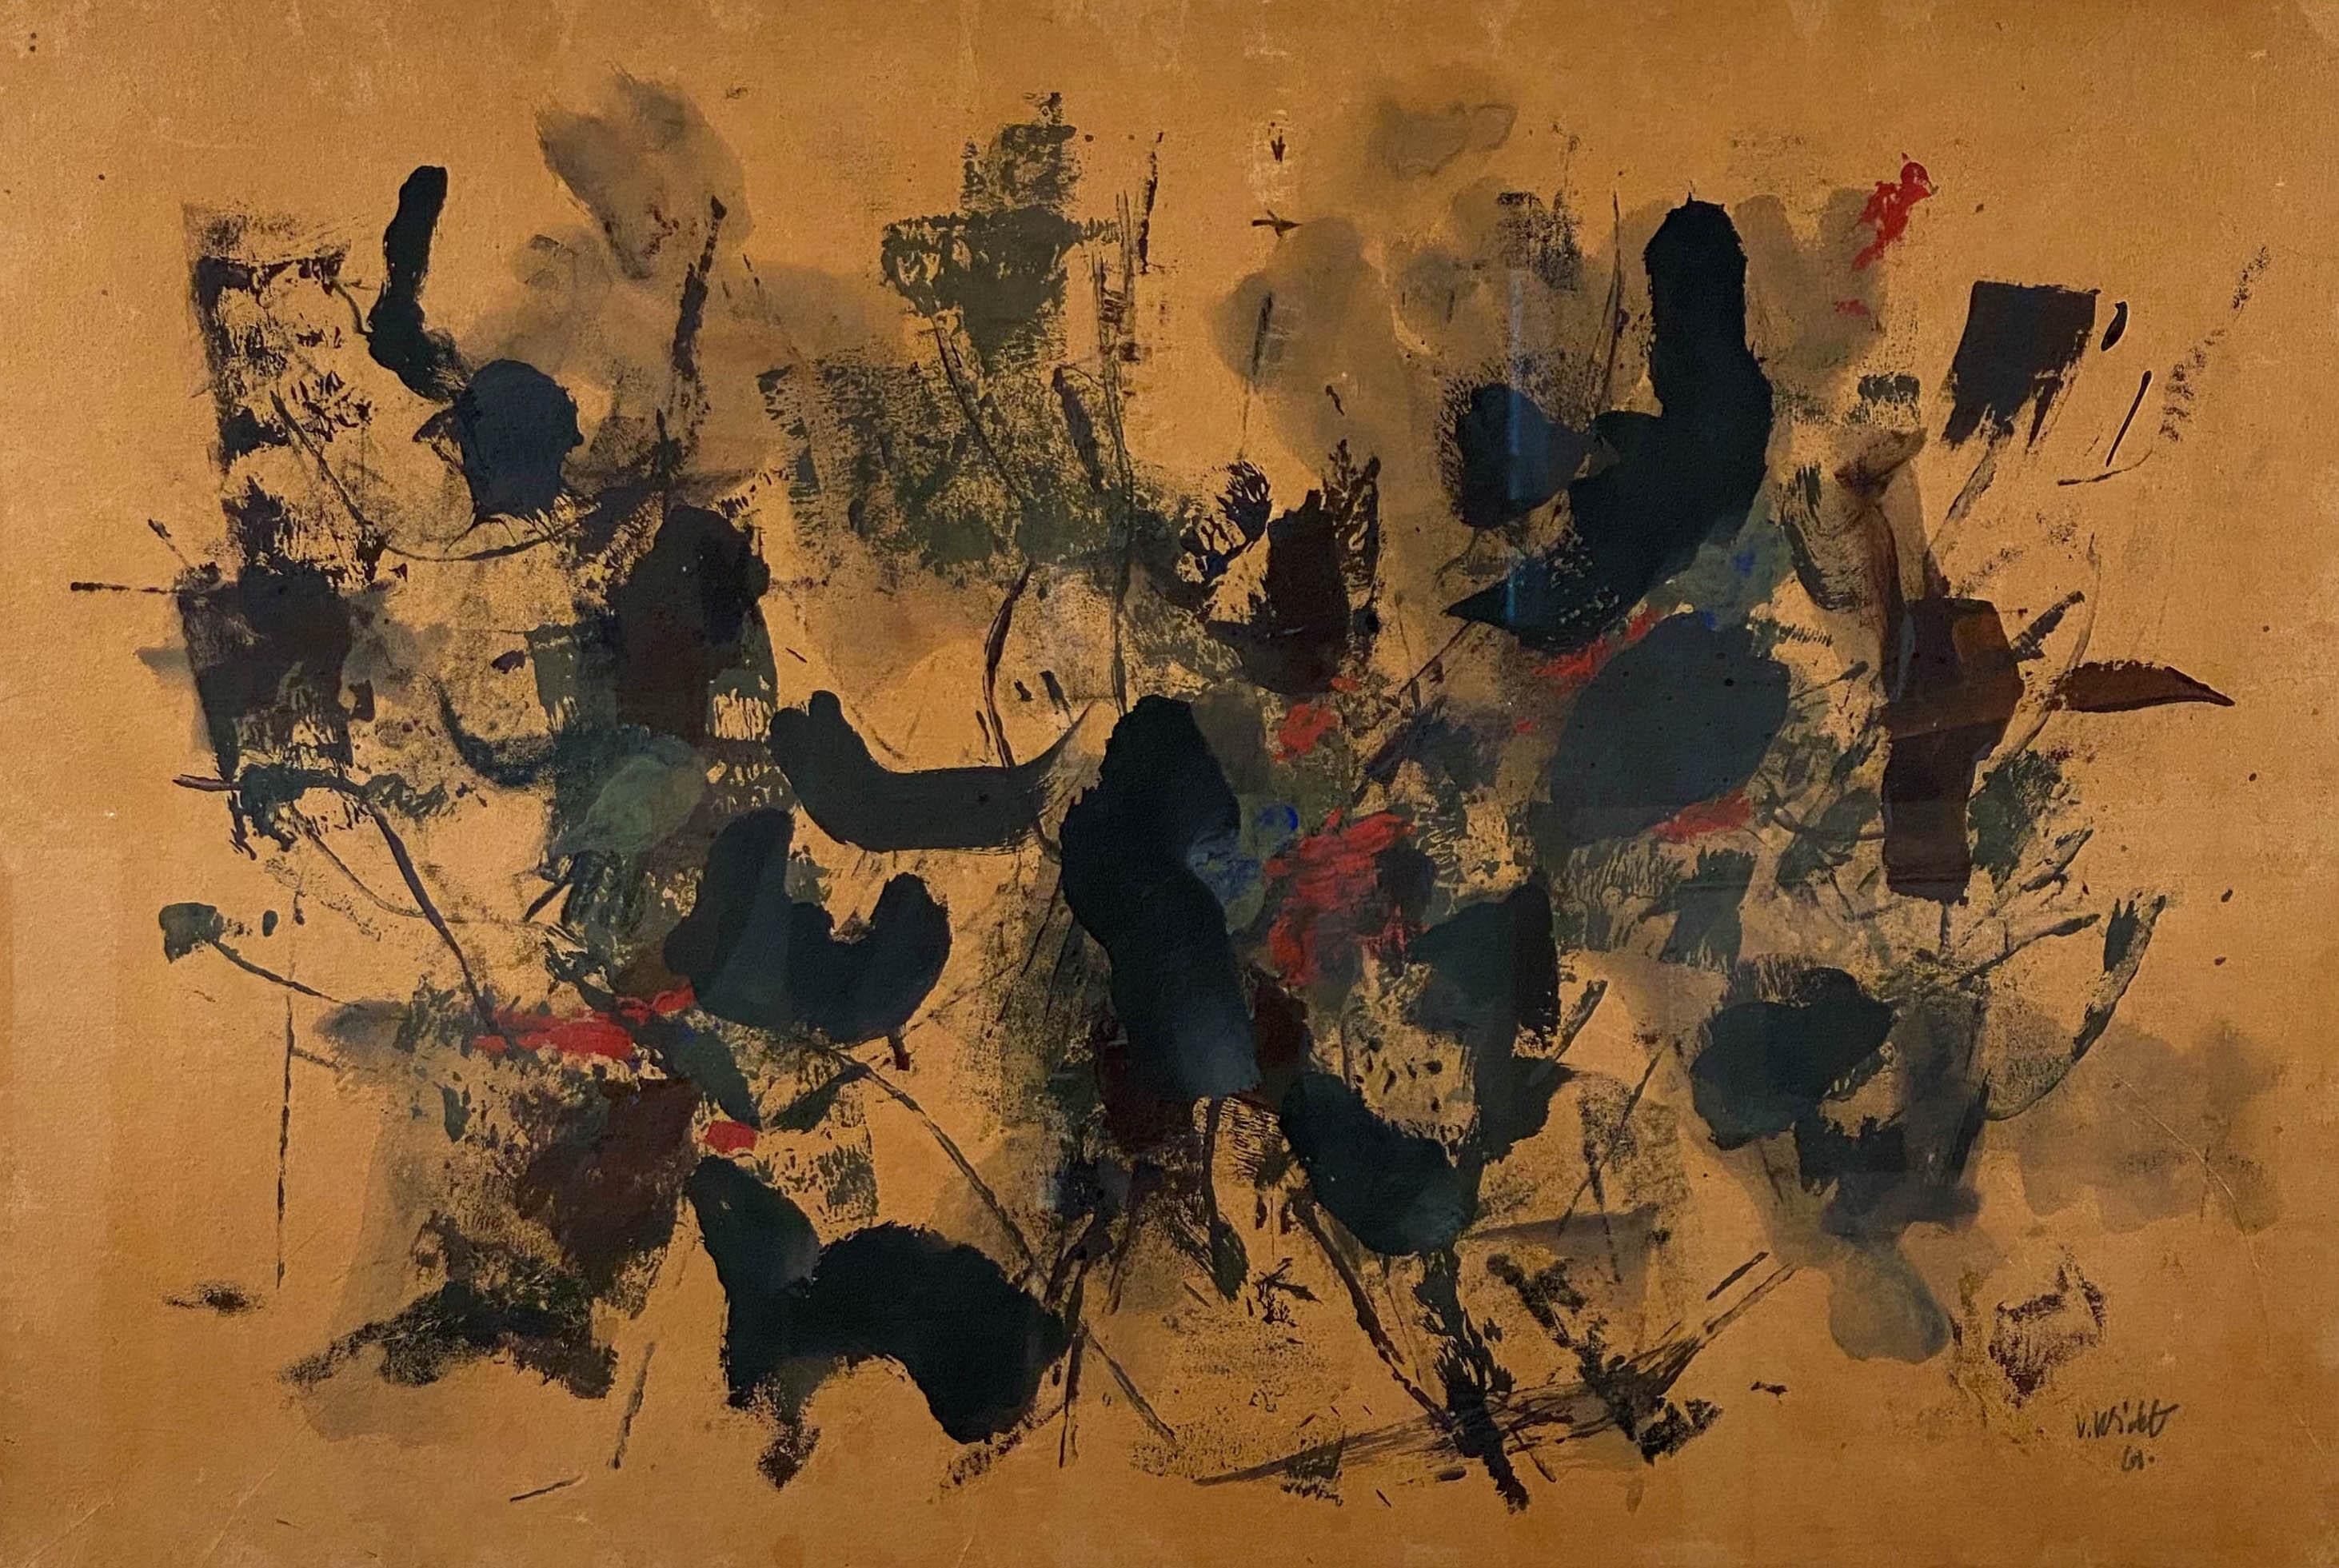 John Von Wicht
American, 1888-1970
Abstract Composition

Oil & mixed media on Paper
25 by 38 in.  W/frame 31 by 44 in.
Signed lower right  & dated 61

Johannes Von Wicht was born in Malente, Germany on February 3rd, 1888. His mother moved the family